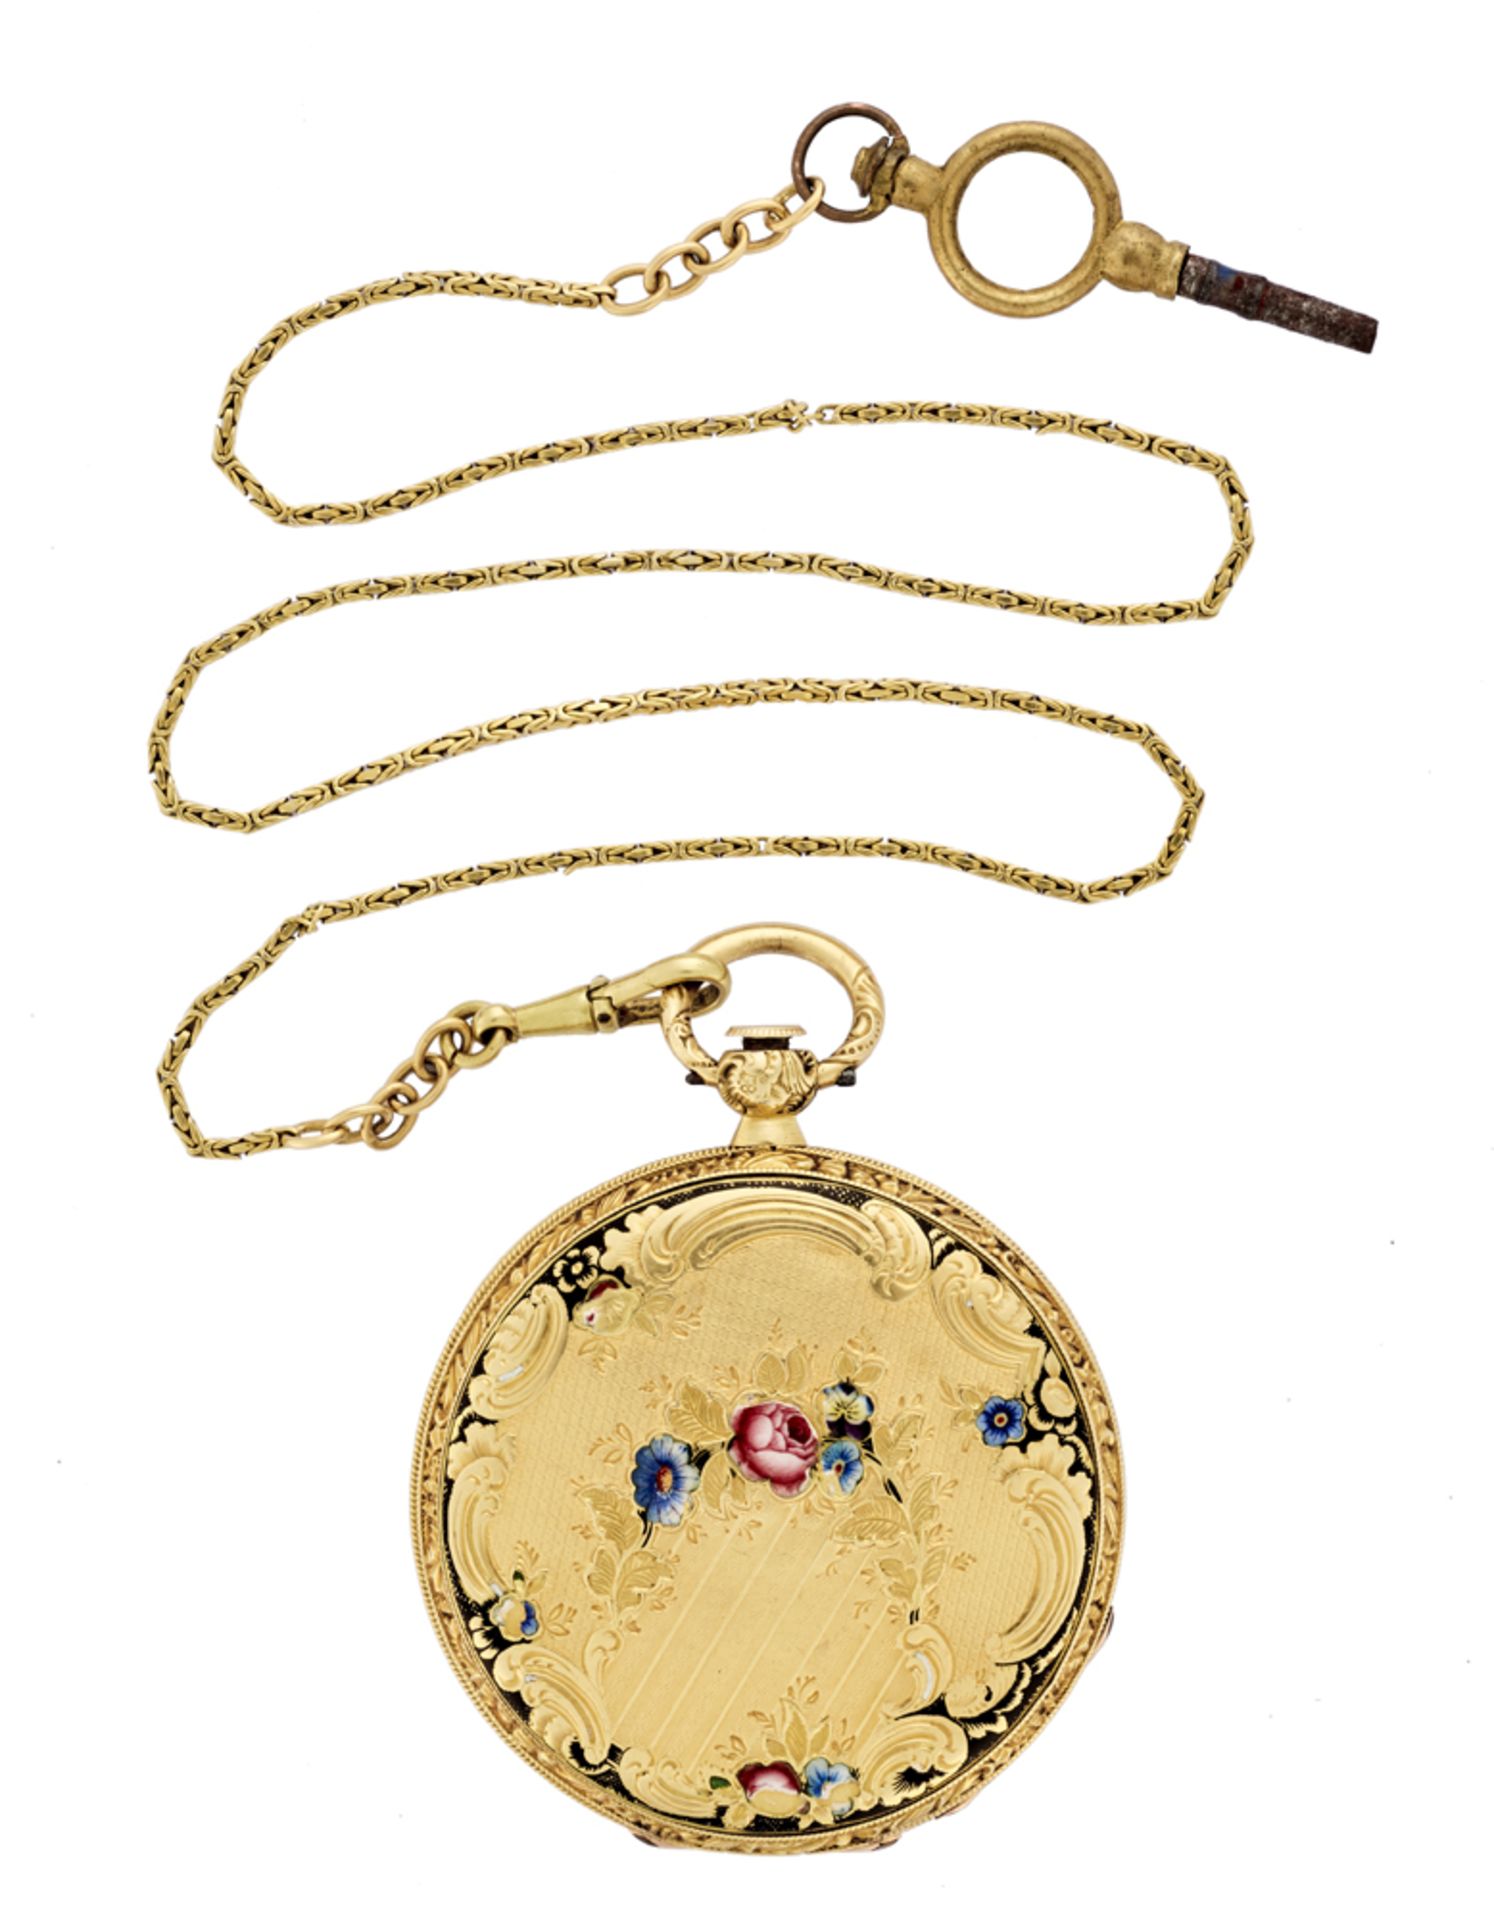 ANONYMOUS Gent's 18K gold pocket watch with enamel, gold chain19th centuryKey-wind movementCase n. - Image 2 of 2